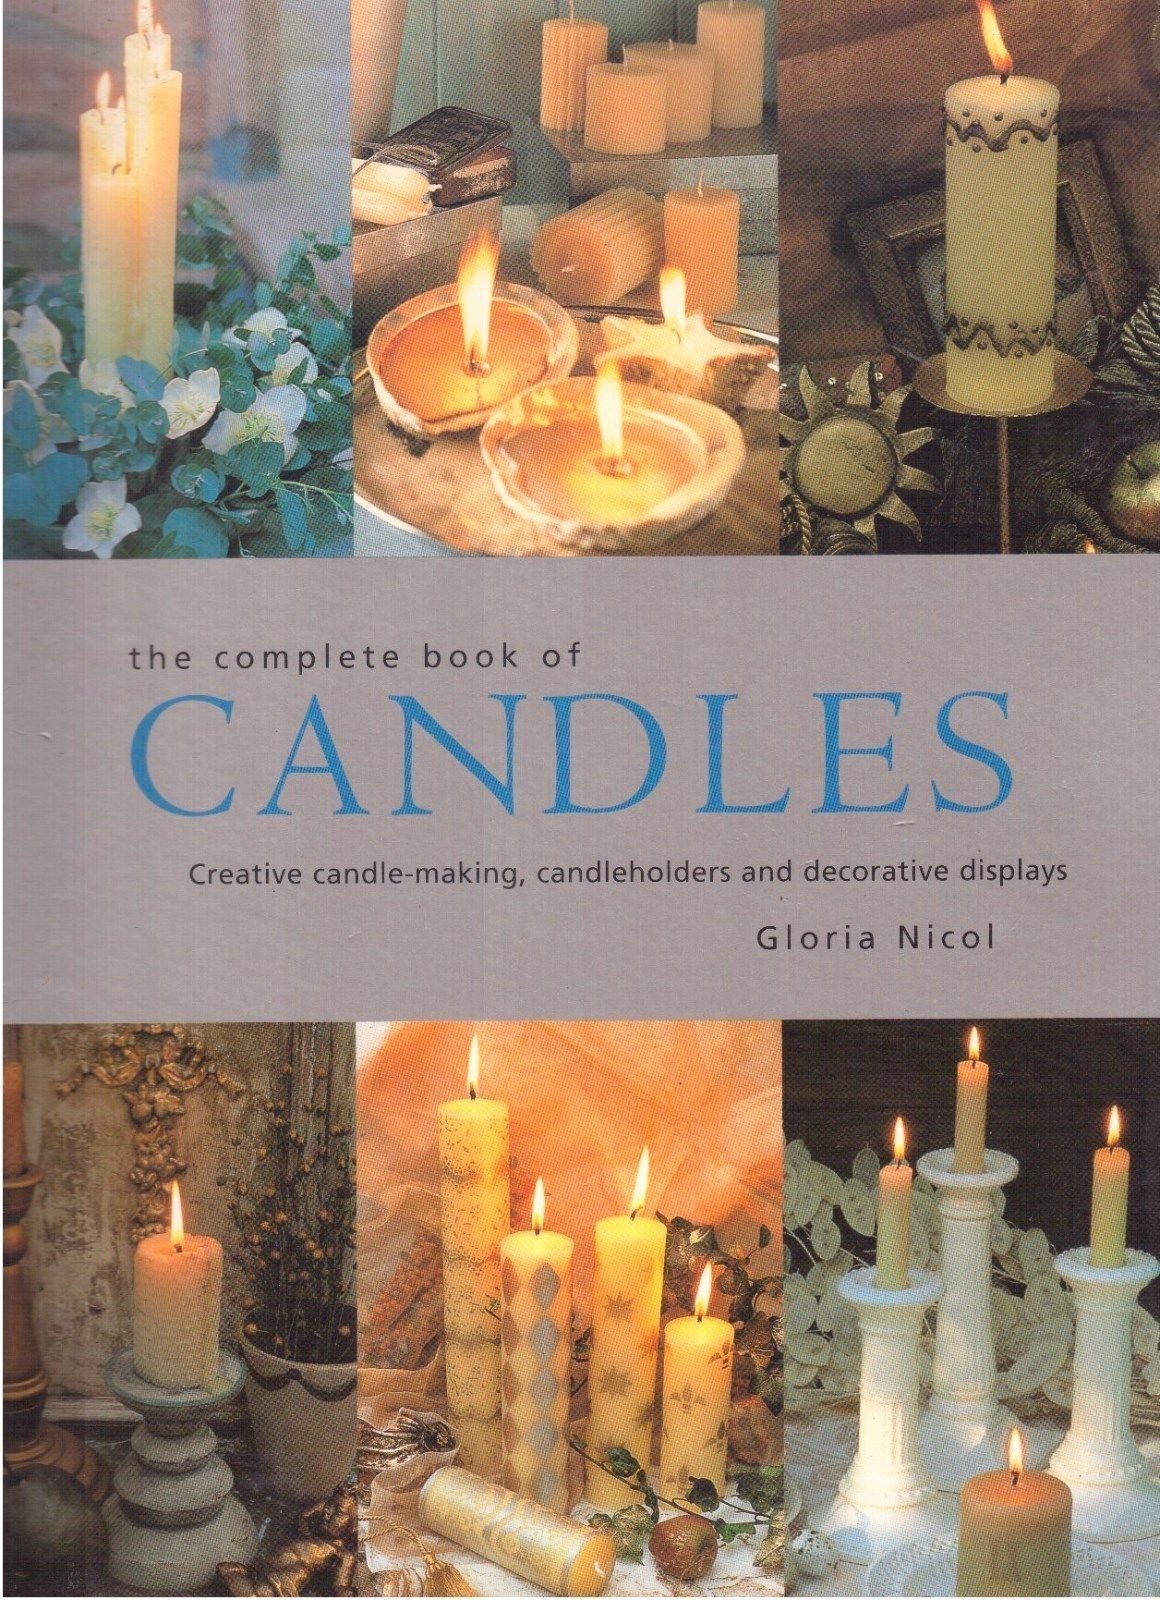 The complete book of Candles by Gloria Nicol